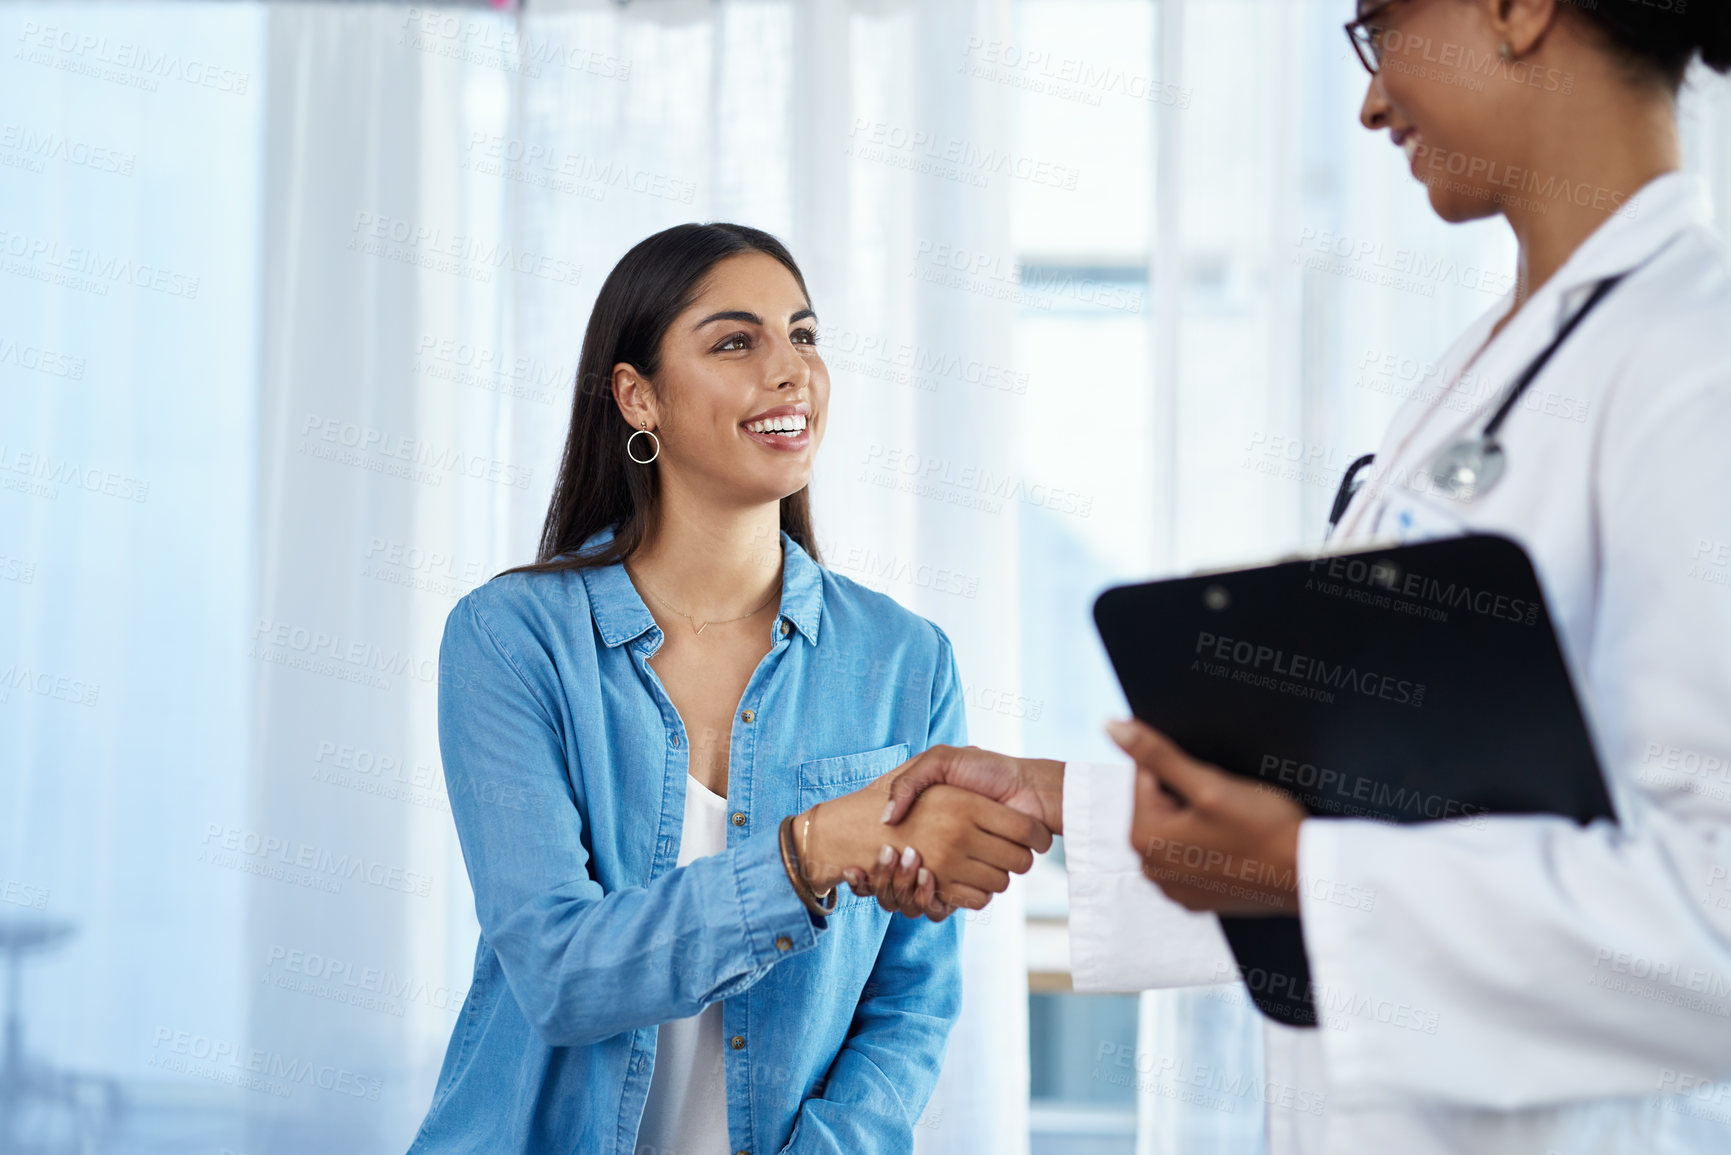 Buy stock photo Shot of a young doctor shaking hands with a patient in her consulting room